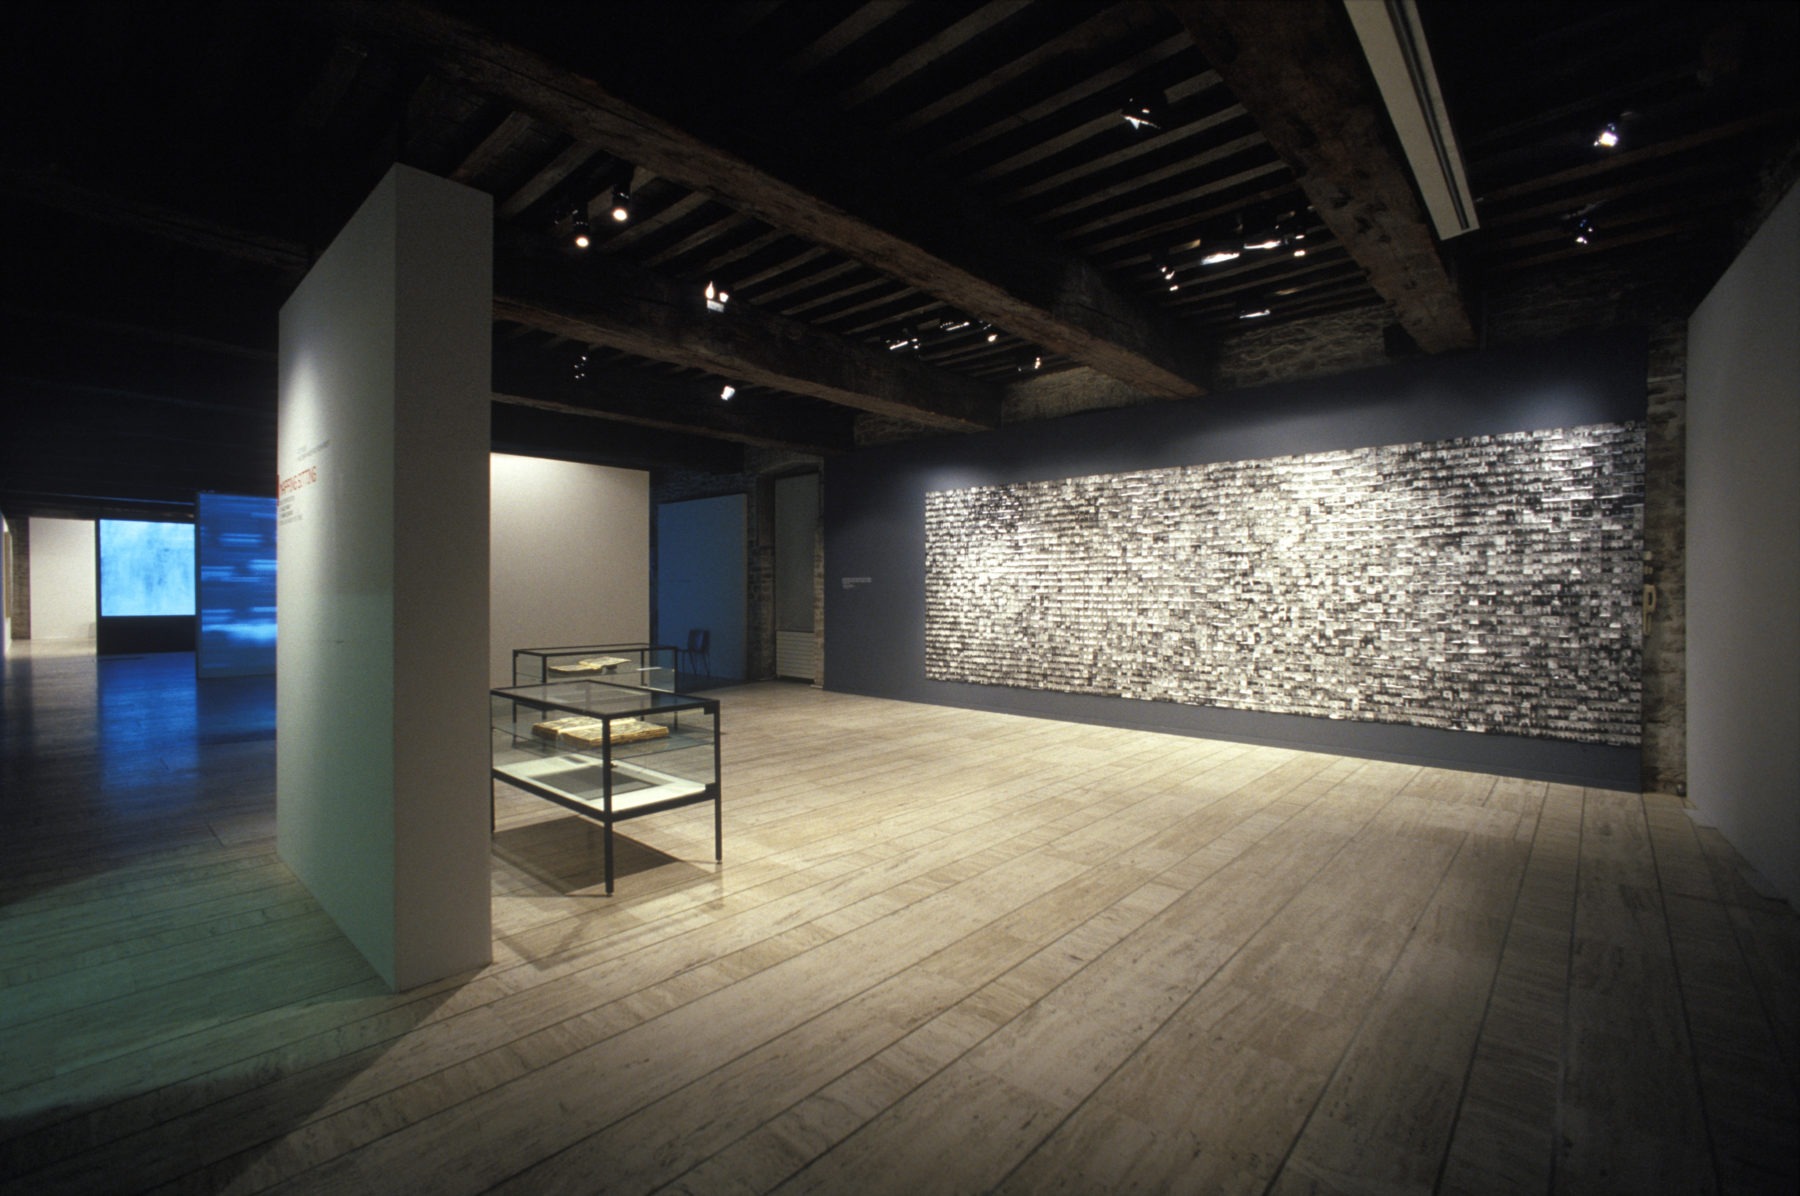 Walid Raad and Akram Zaatari, 'Mapping Sitting', 2002. Installation view at Musée Nicephore Niepce, 2004, courtesy of the artists and the Arab Image Foundation